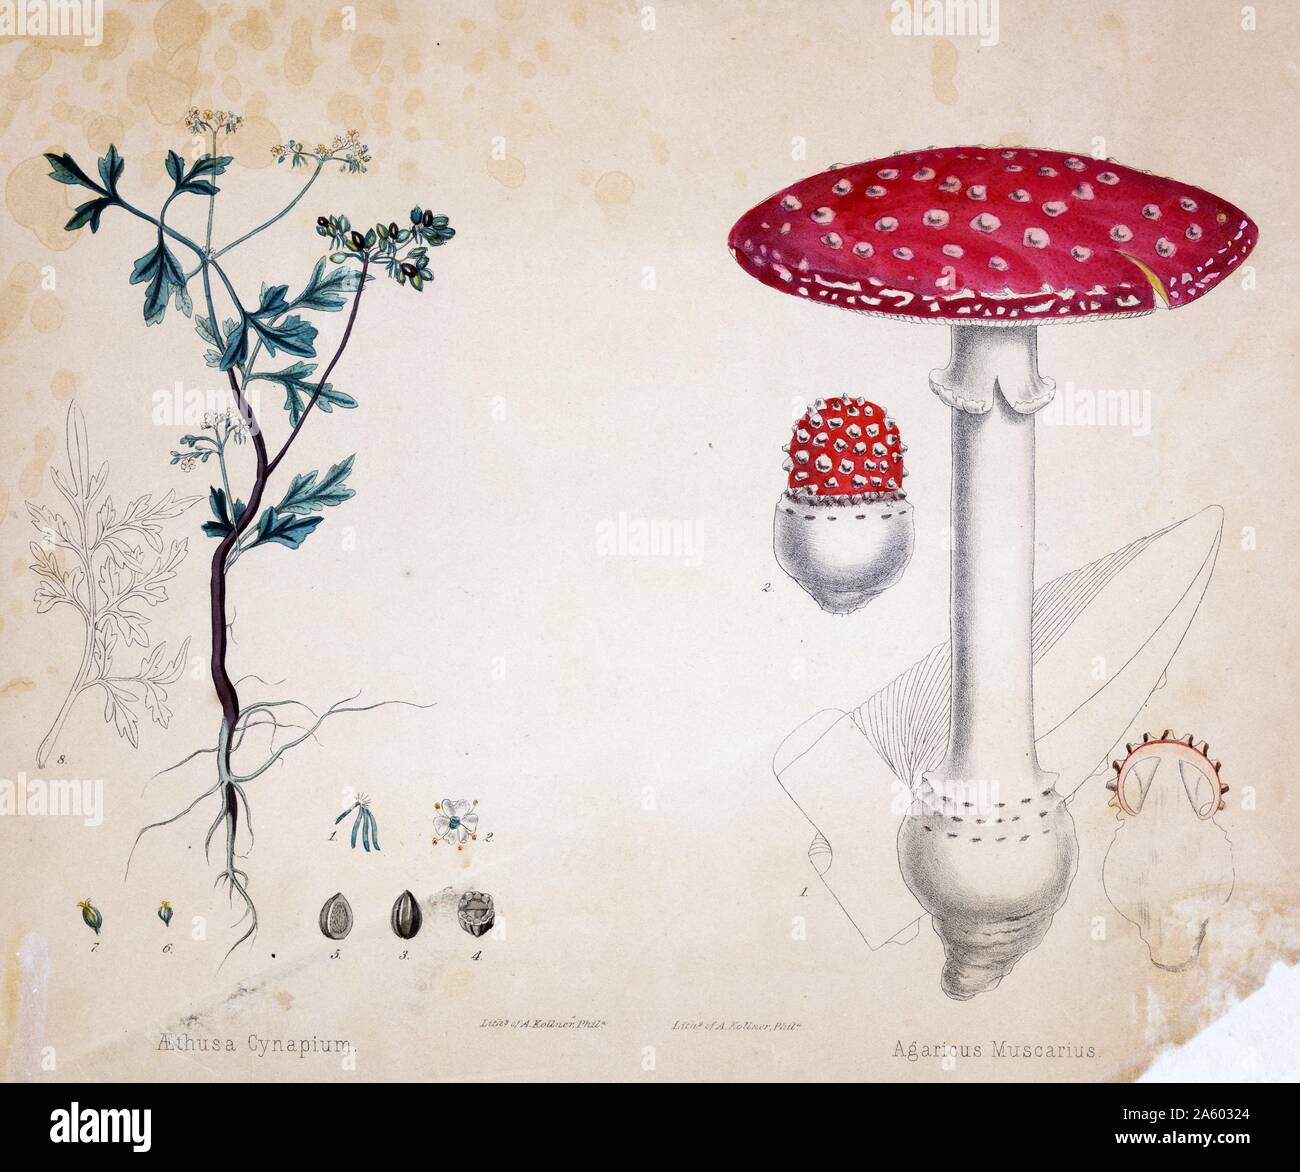 Print specimen of botanical illustration for Aethusa Cynapium, a herb and Agaricus Mascarius, a mushroom by Augustus Kollner (1813-1906), hand-coloured lithograph. Stock Photo